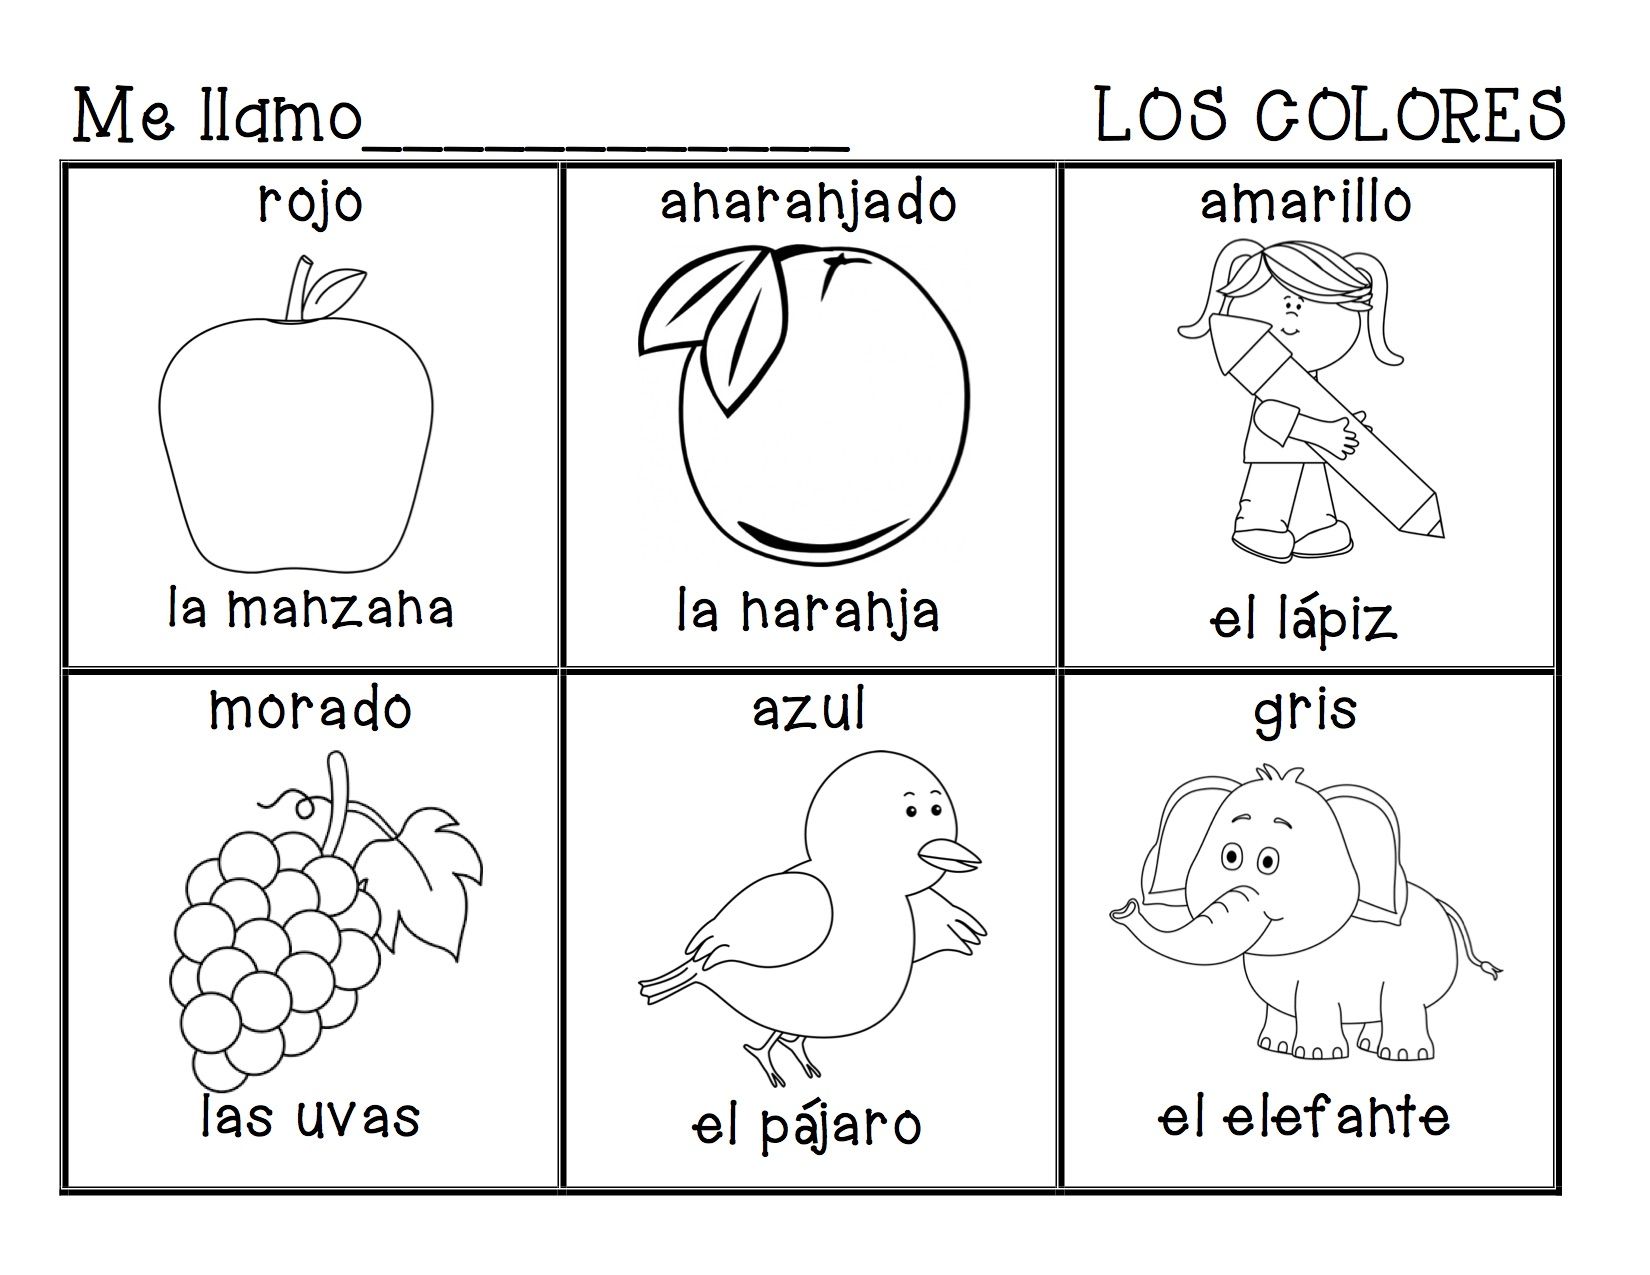 Spanish coloring sheet for a paintbrush for paco by tracey kyleâ spanish lessons for kids kindergarten worksheets free printables coloring pages for teenagers